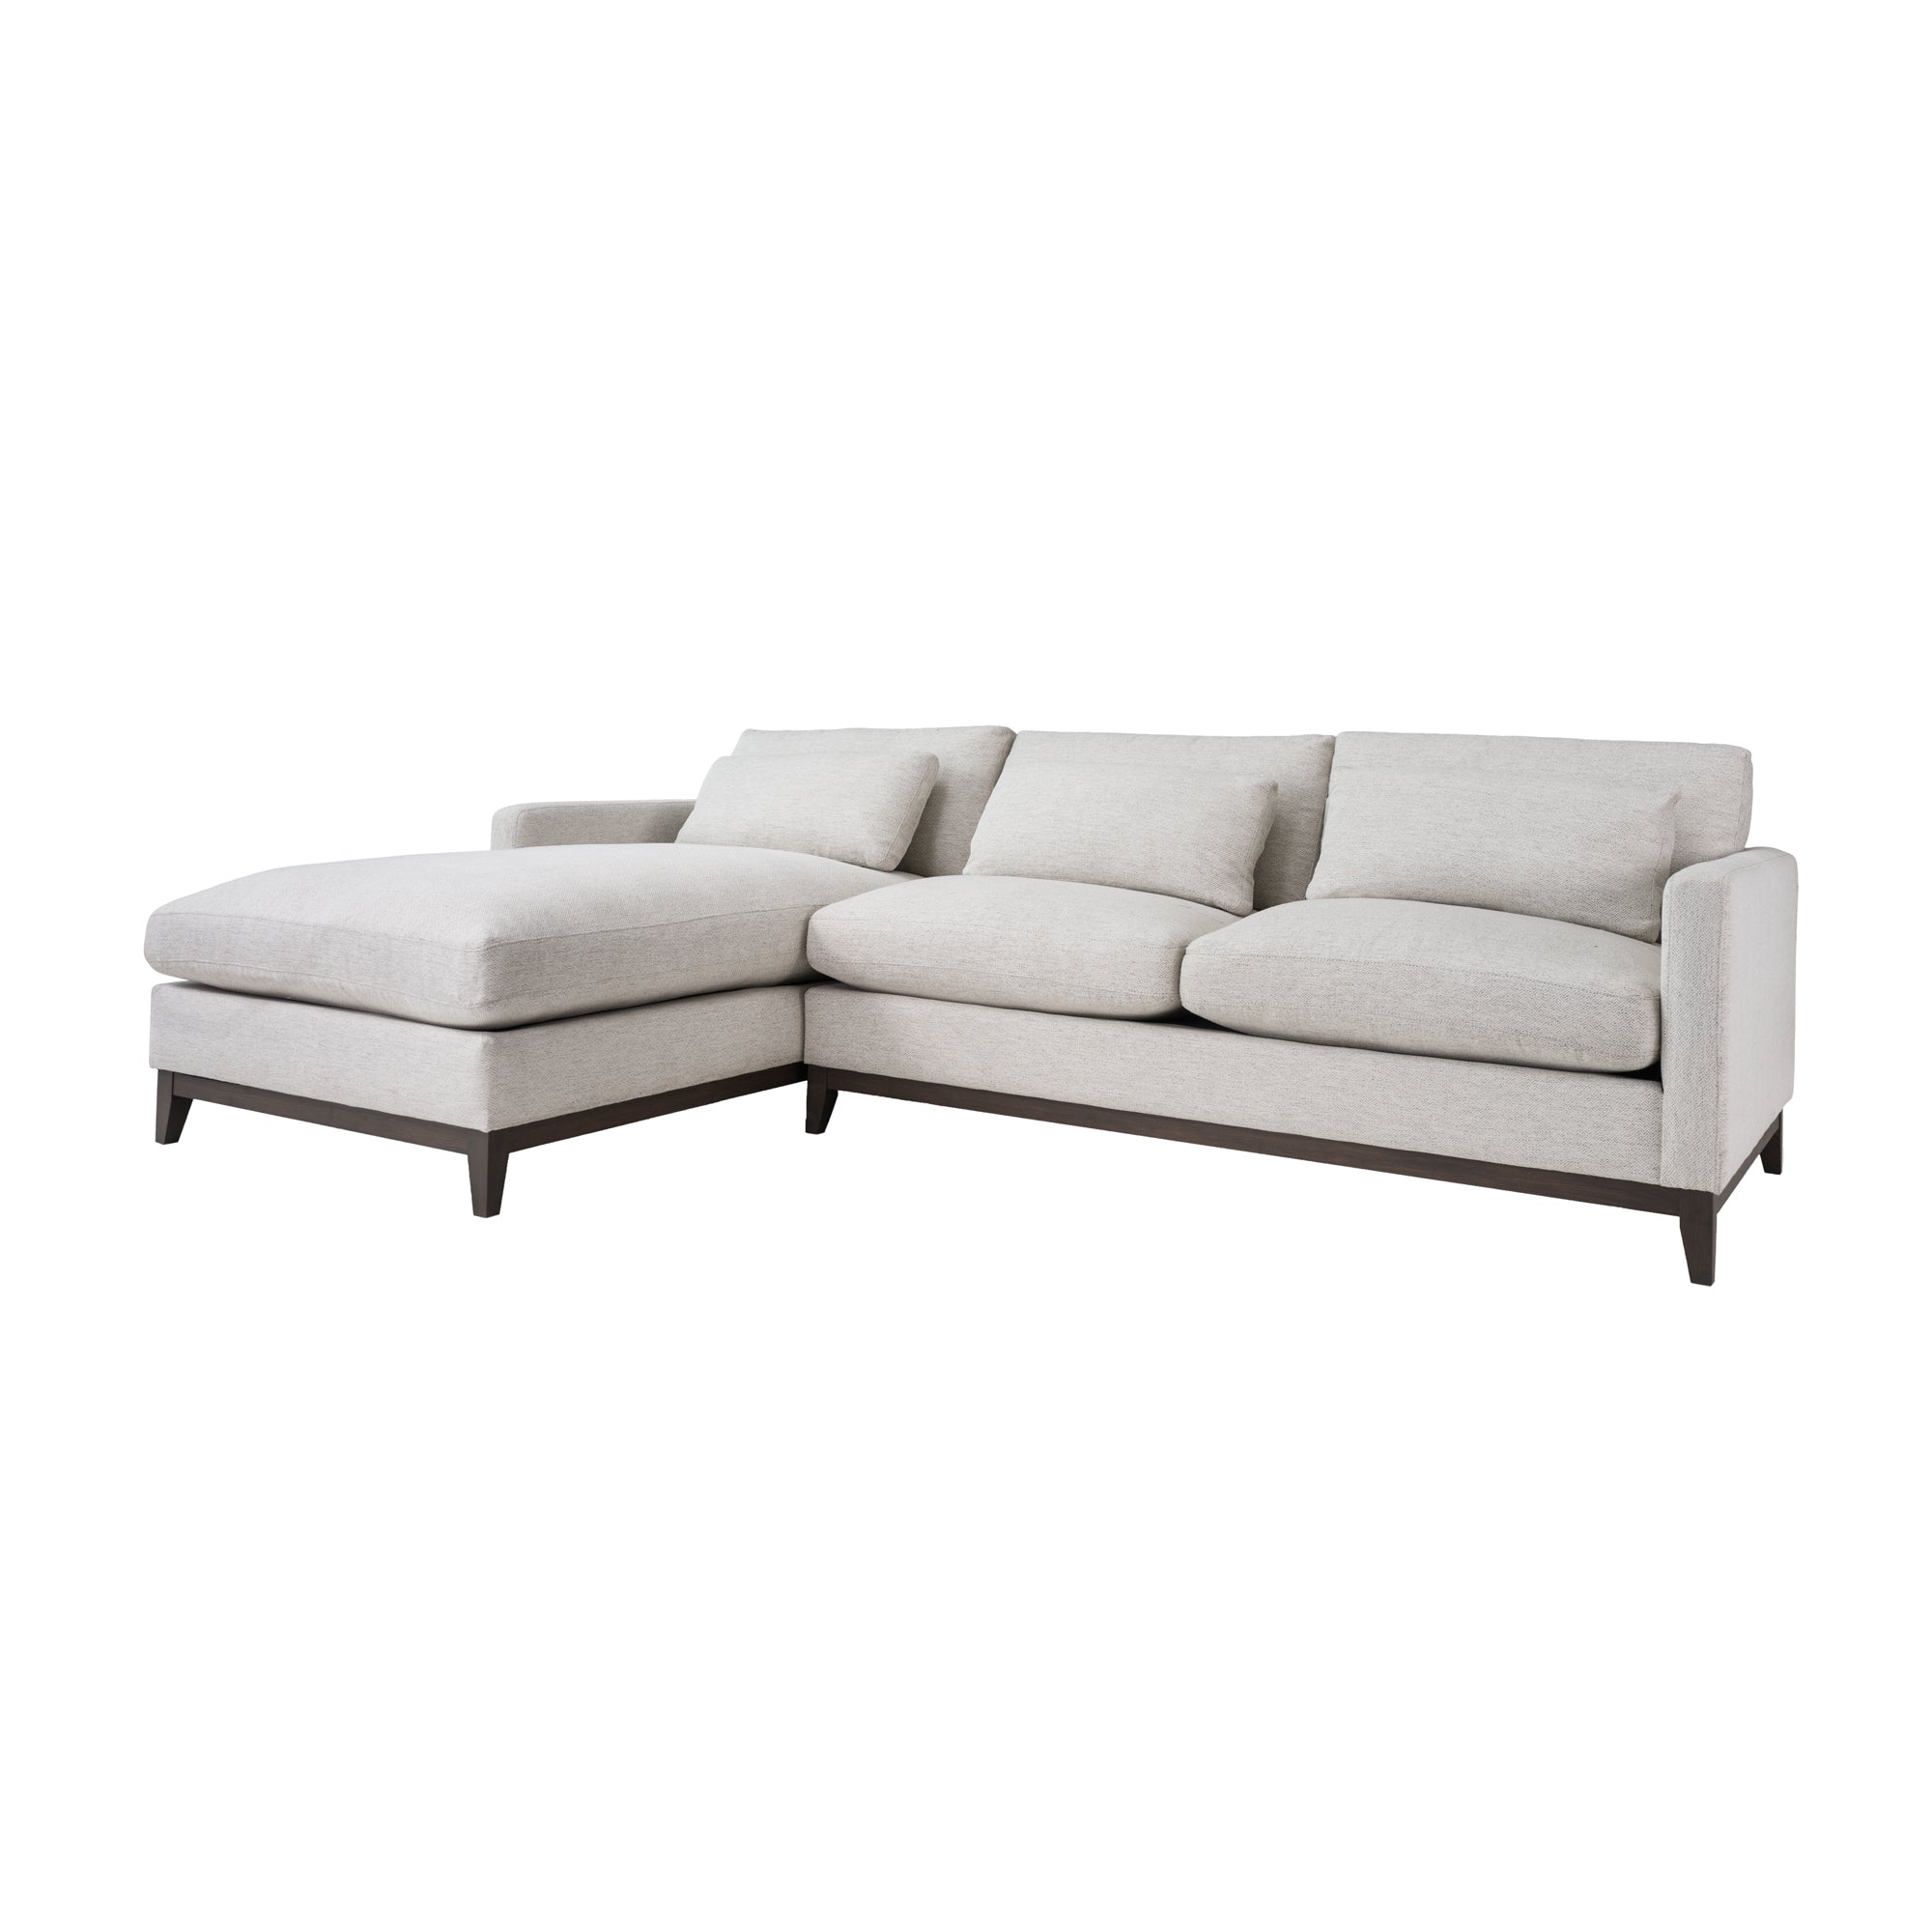 Picture of Oxford Sectional Sofa